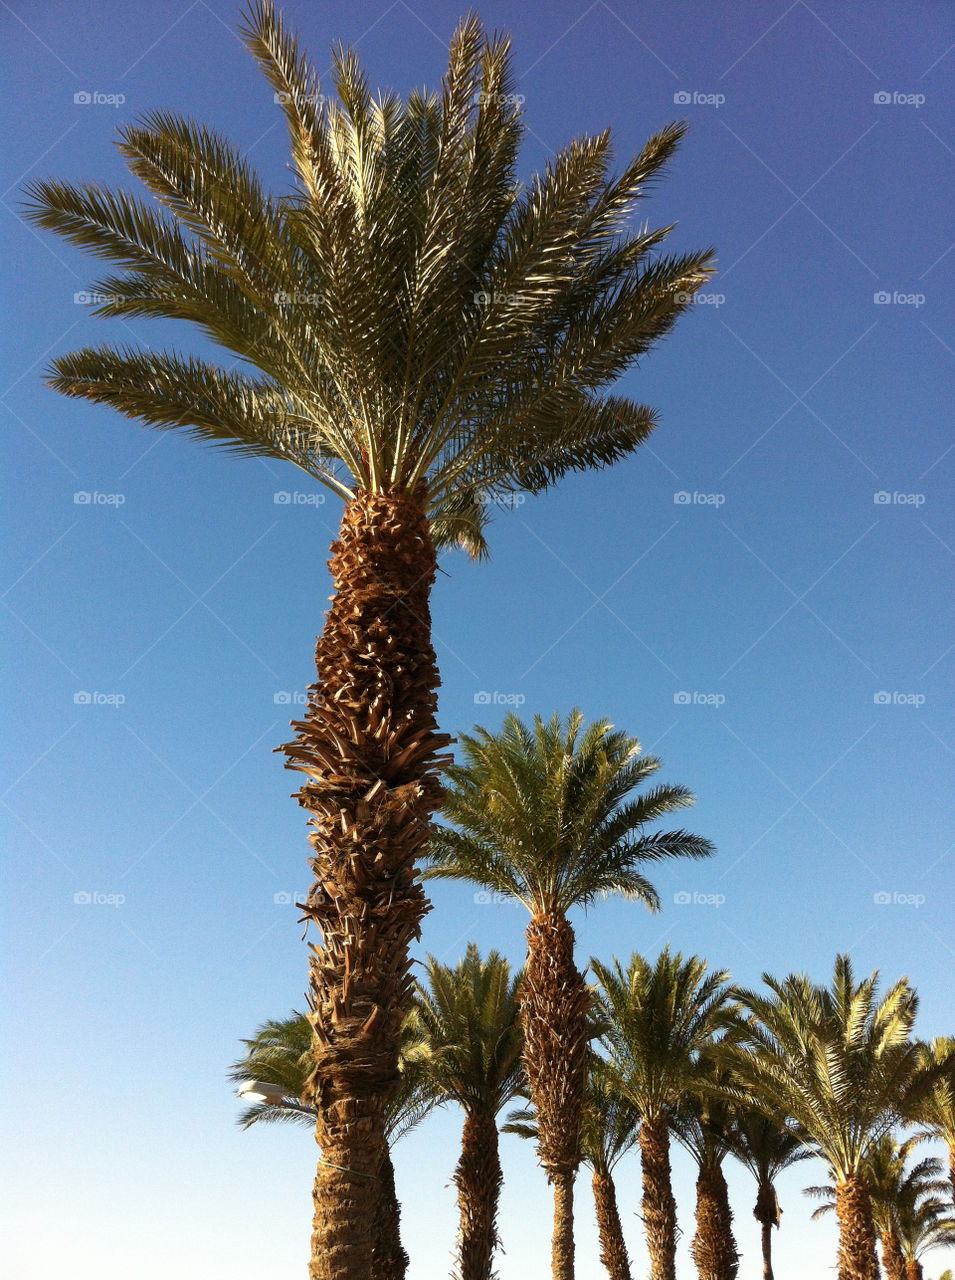 travel summer palm trees by bventresca